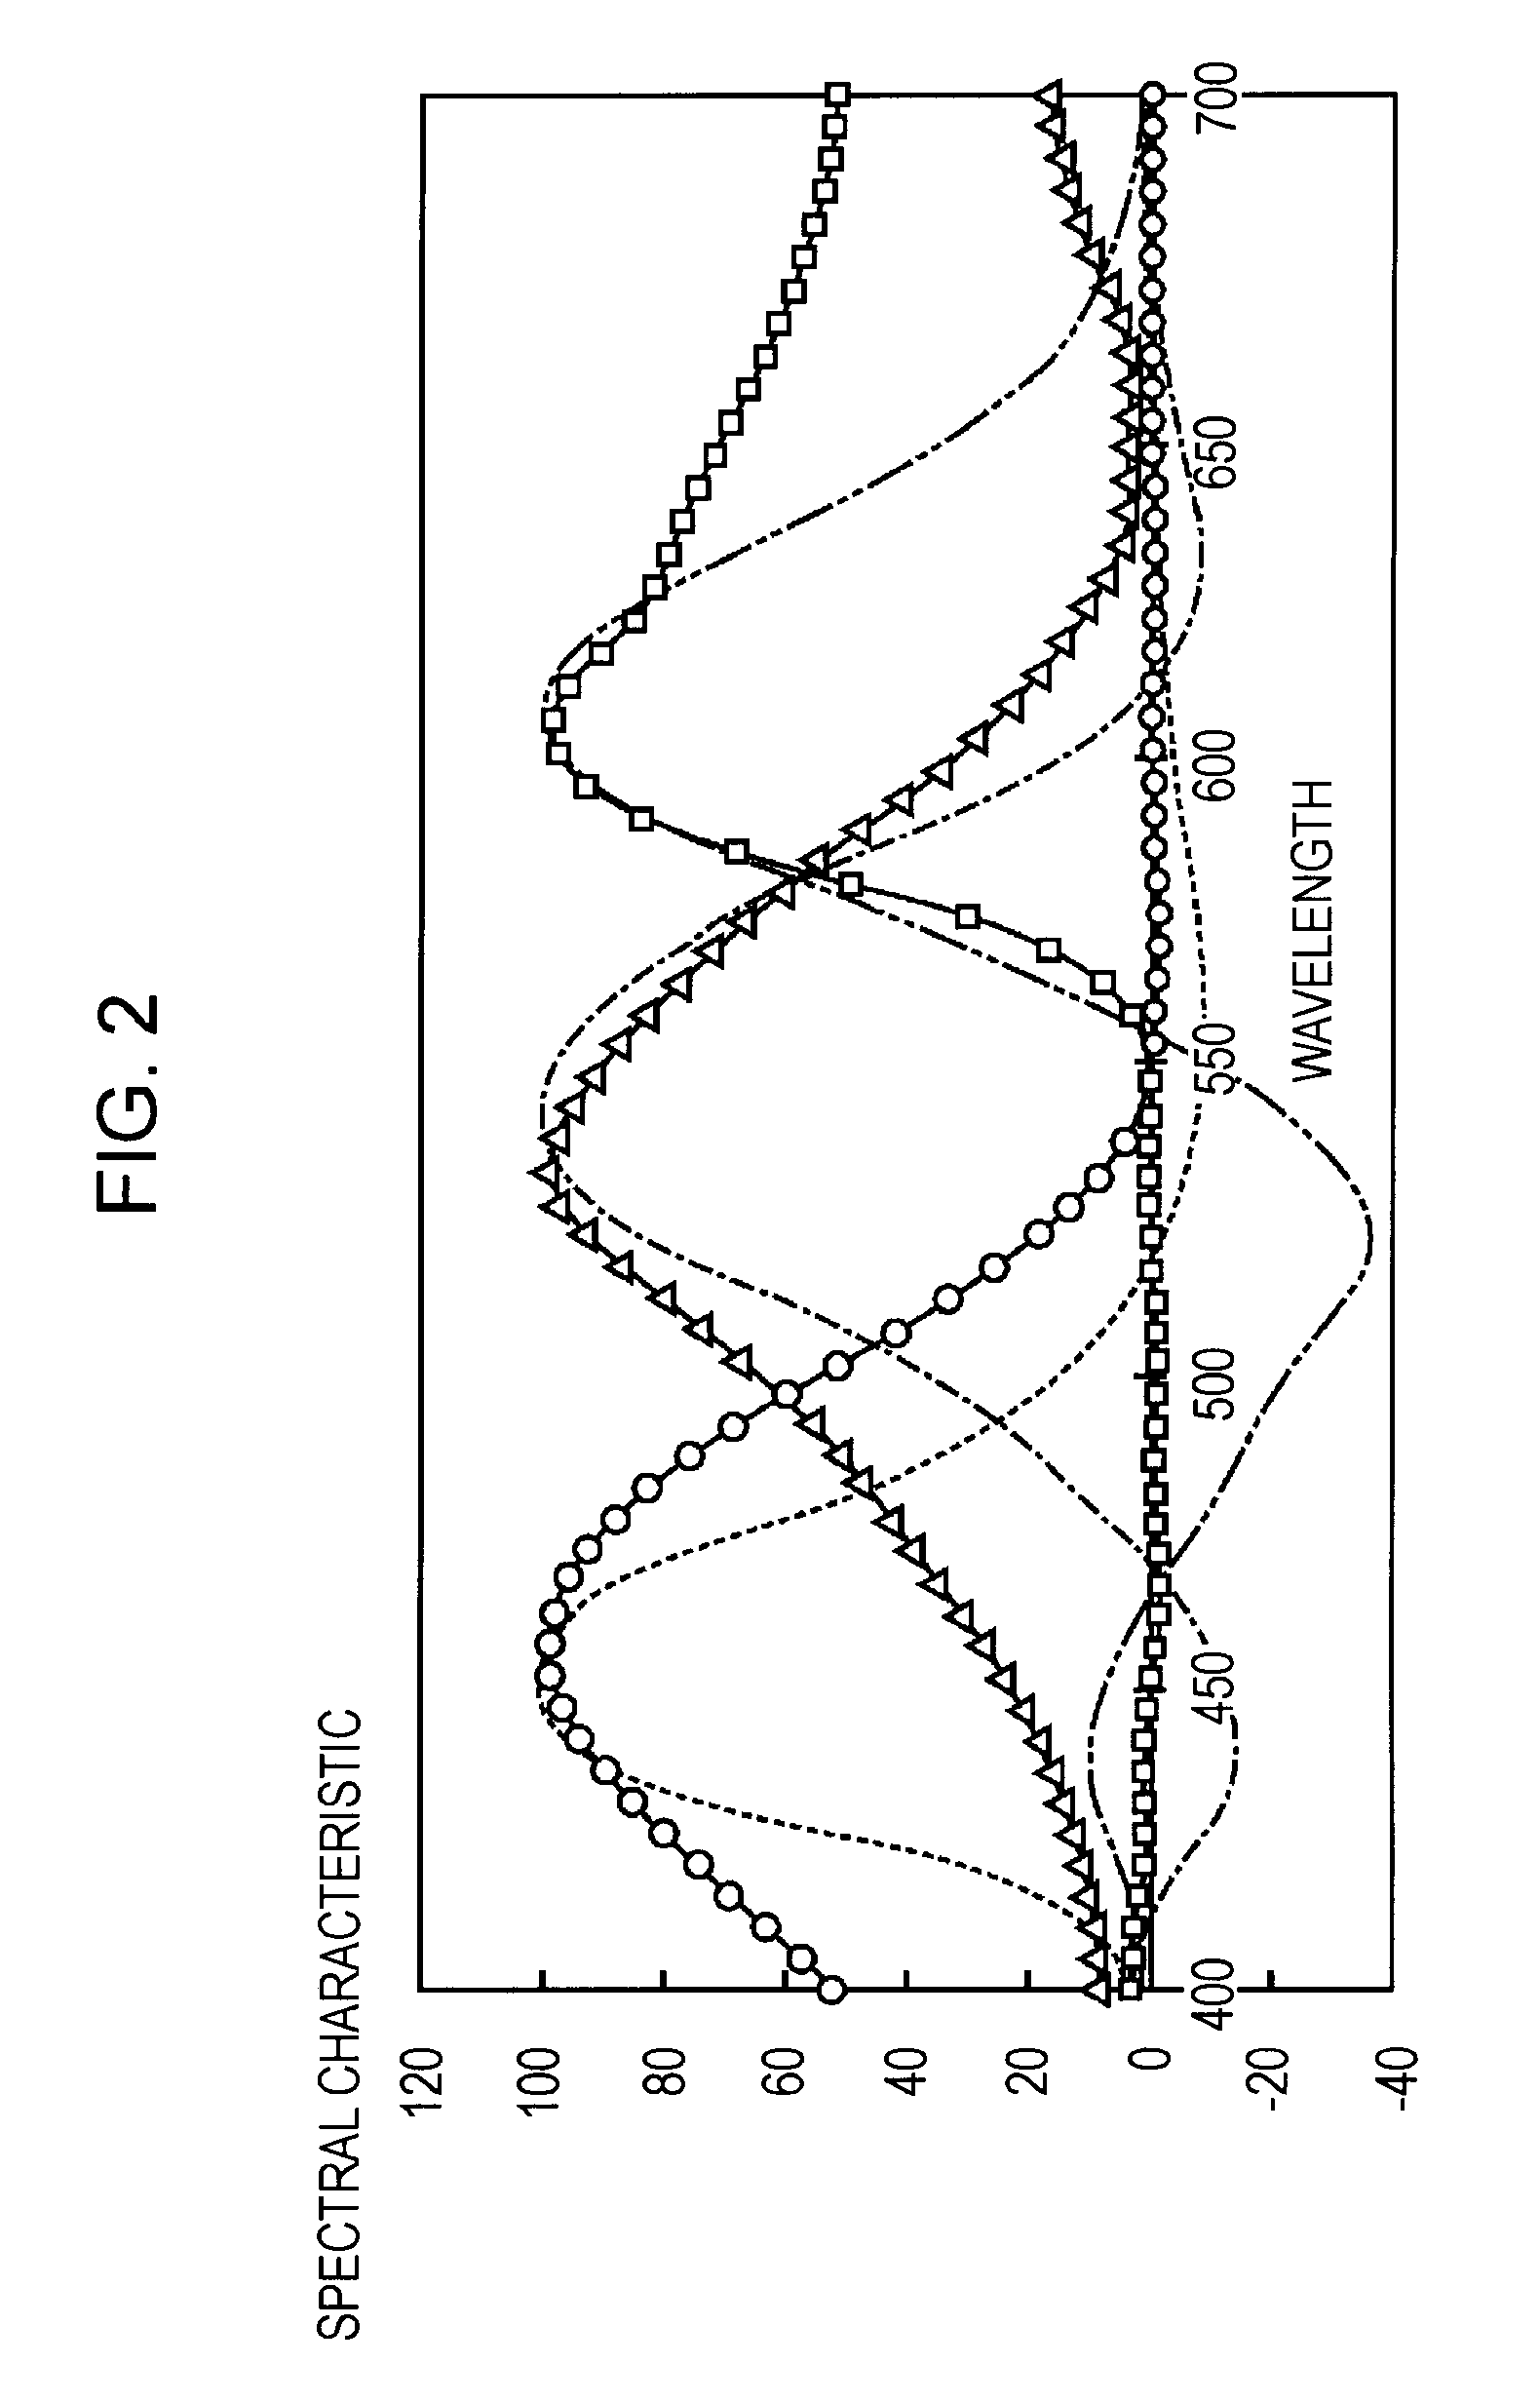 Imaging apparatus and method for approximating color matching functions